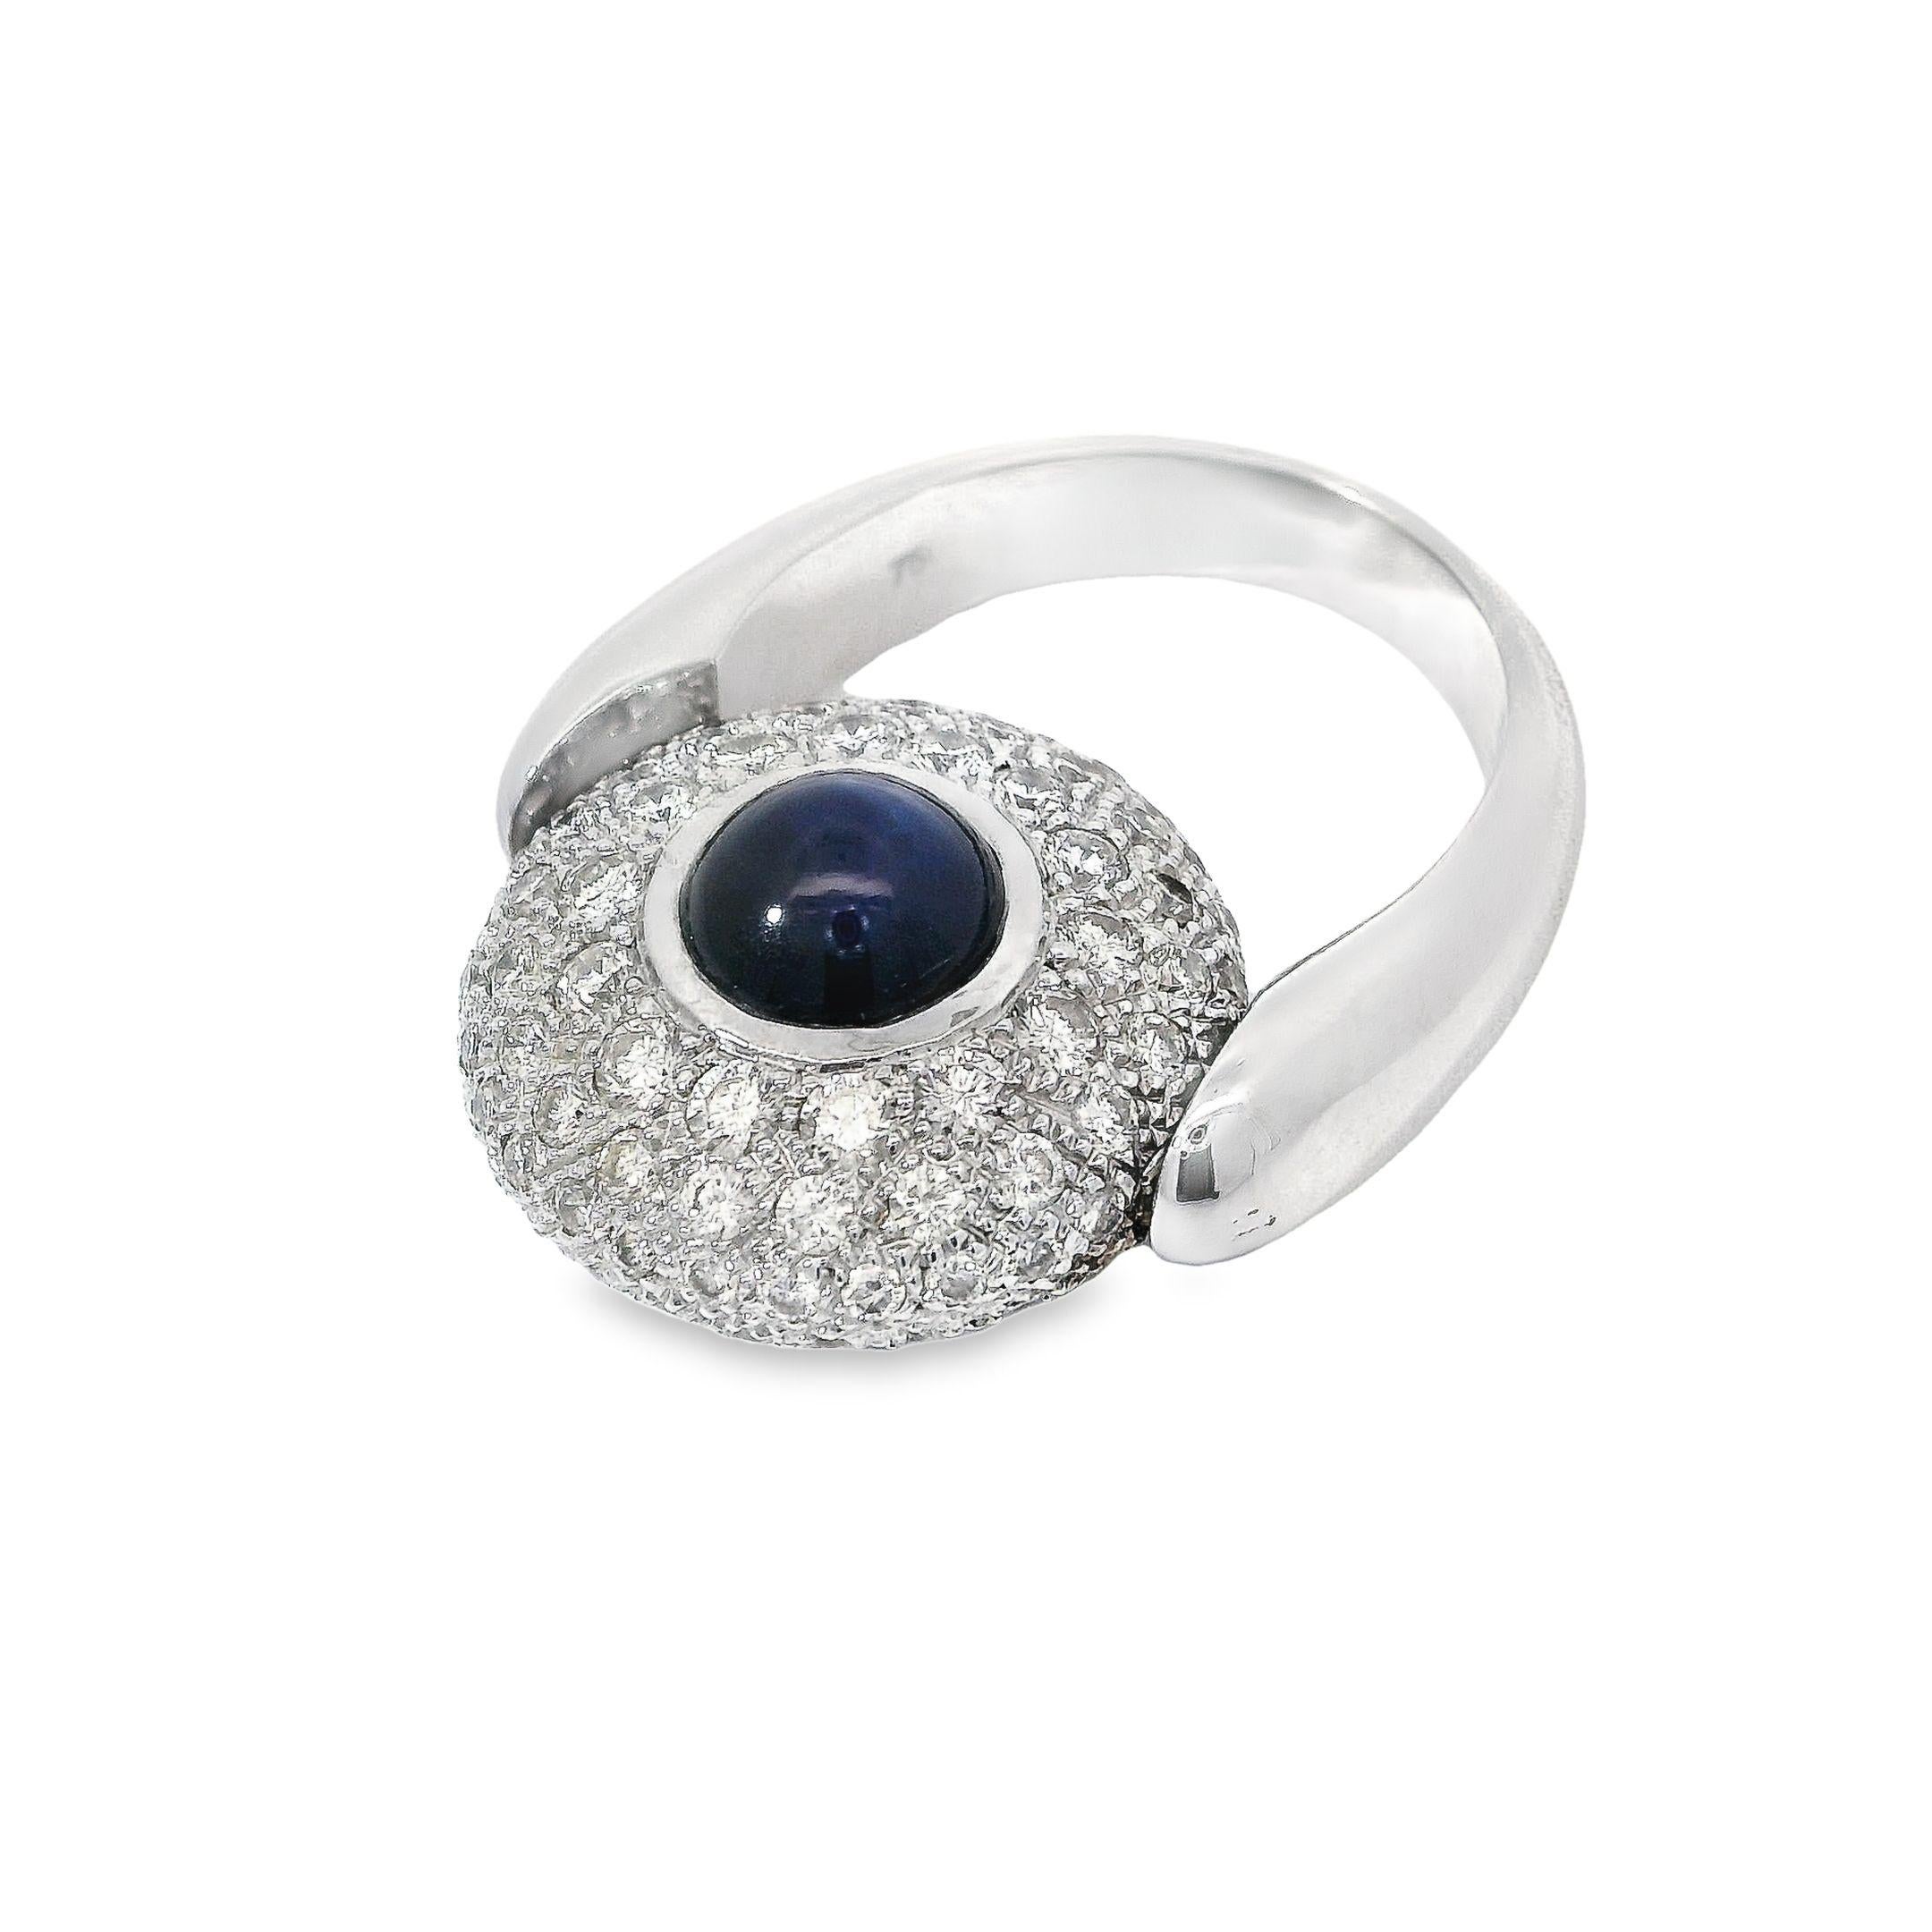 Indulge in opulence with this breathtakingly beautiful and versatile ring that showcases a bold yet elegant design. Crafted from 18K white gold weighing 15.128g, this ring radiates a sense of luxury and sophistication.

At its center lies a majestic